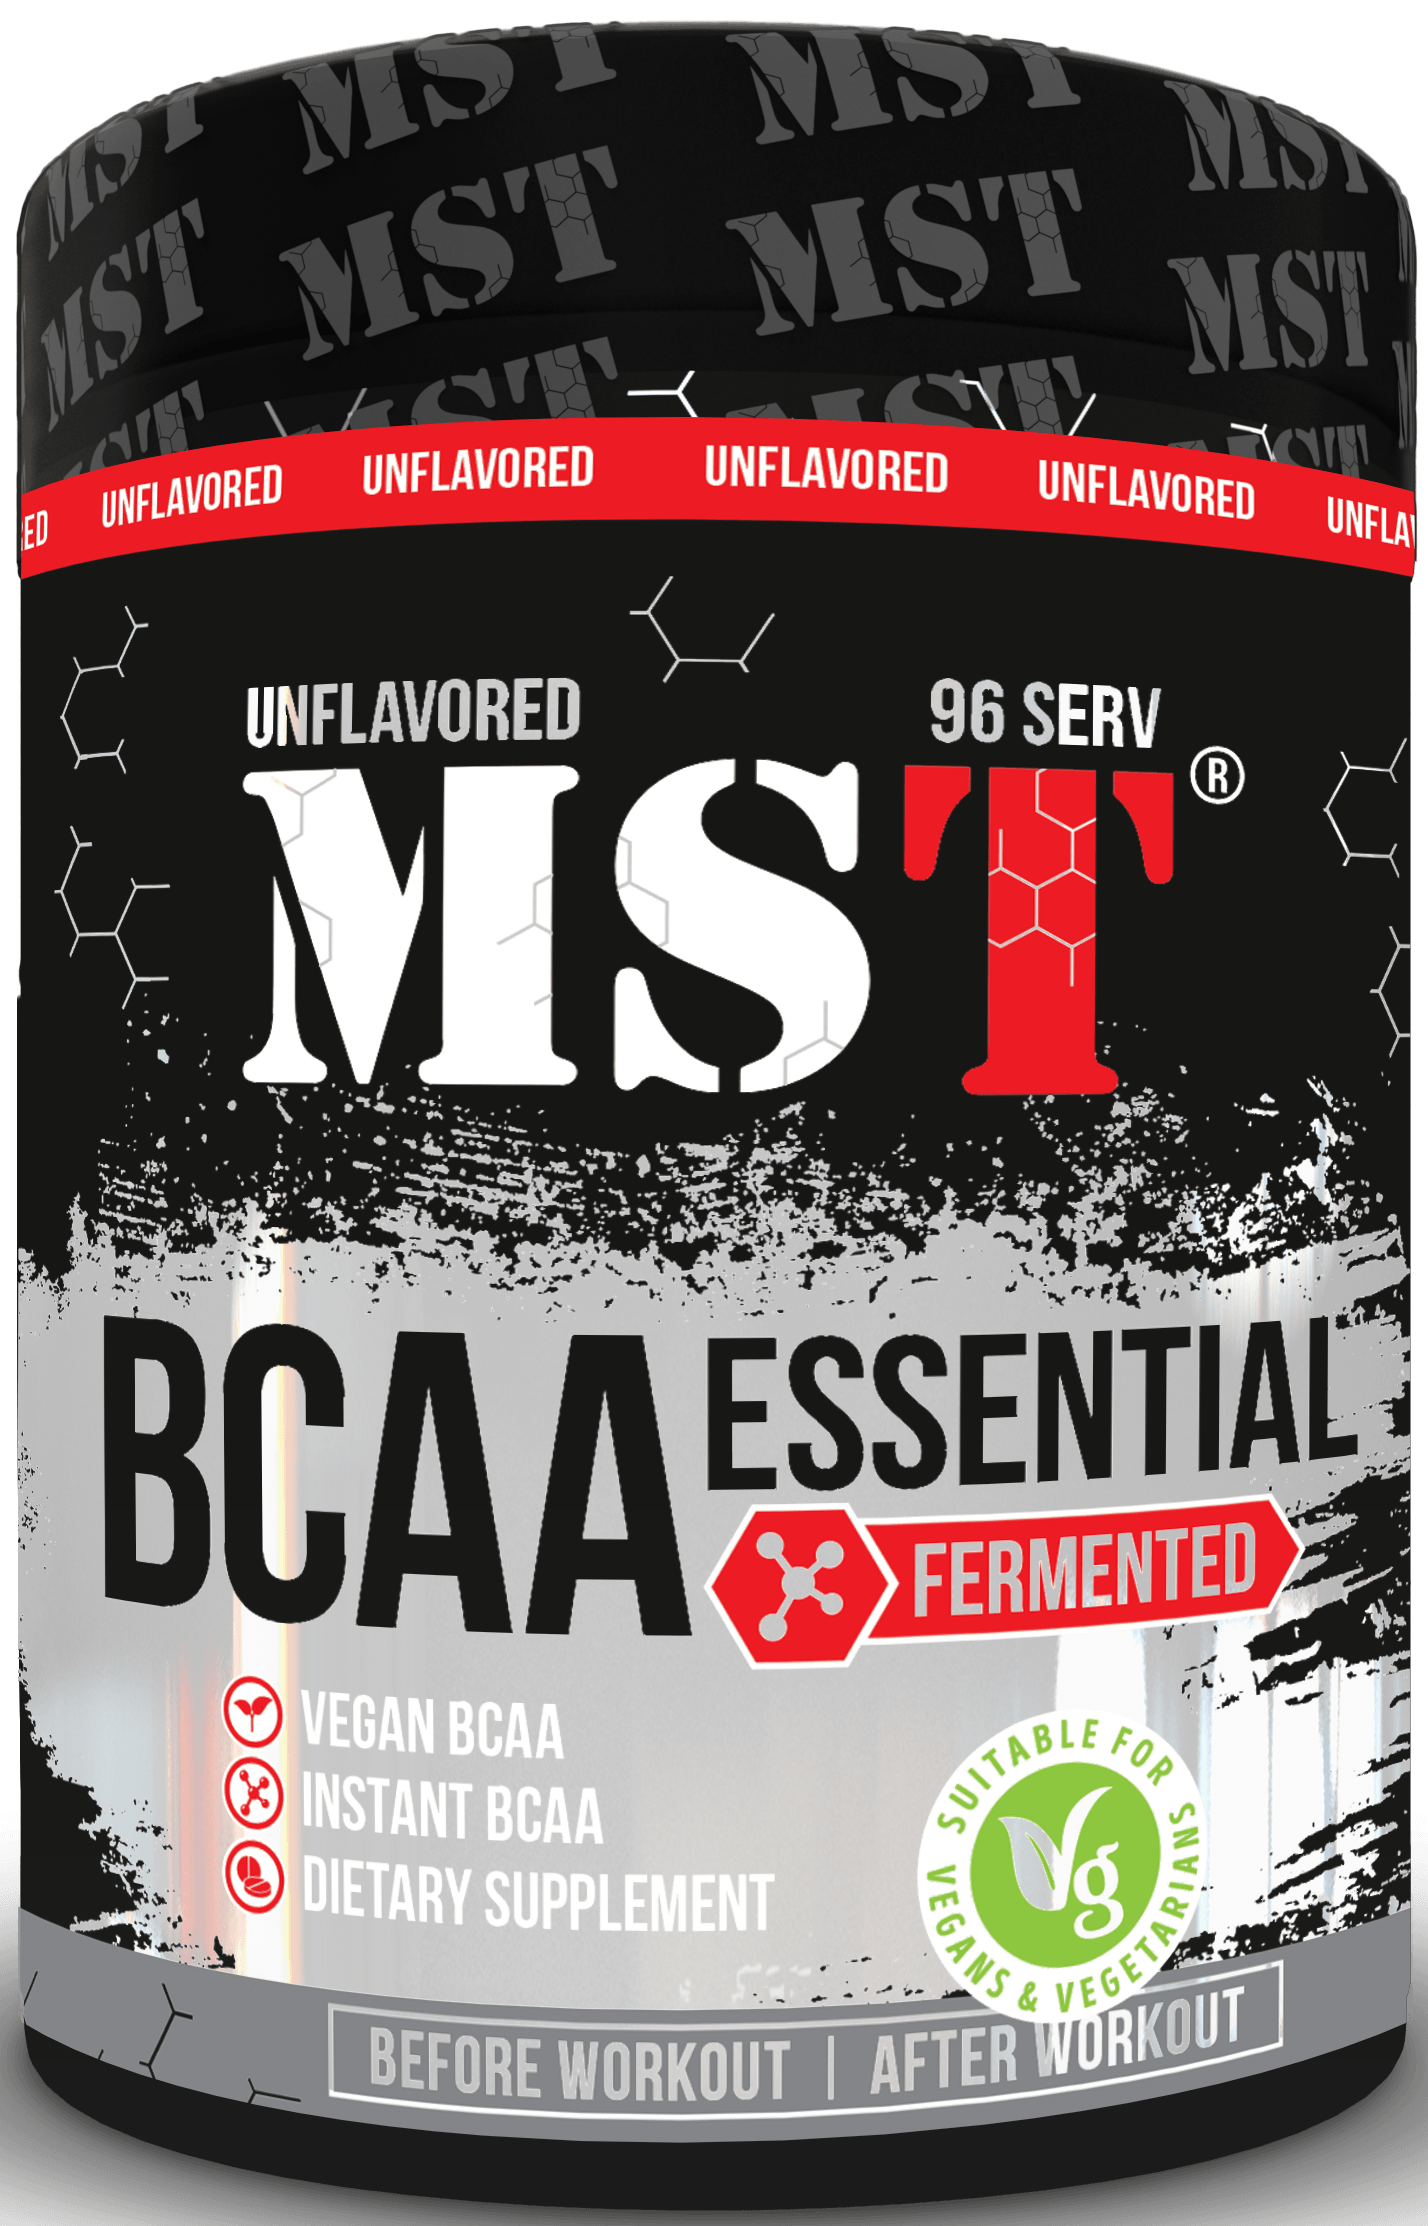 BCAA Essential Fermented, 480 g, MST Nutrition. BCAA. Weight Loss recovery Anti-catabolic properties Lean muscle mass 